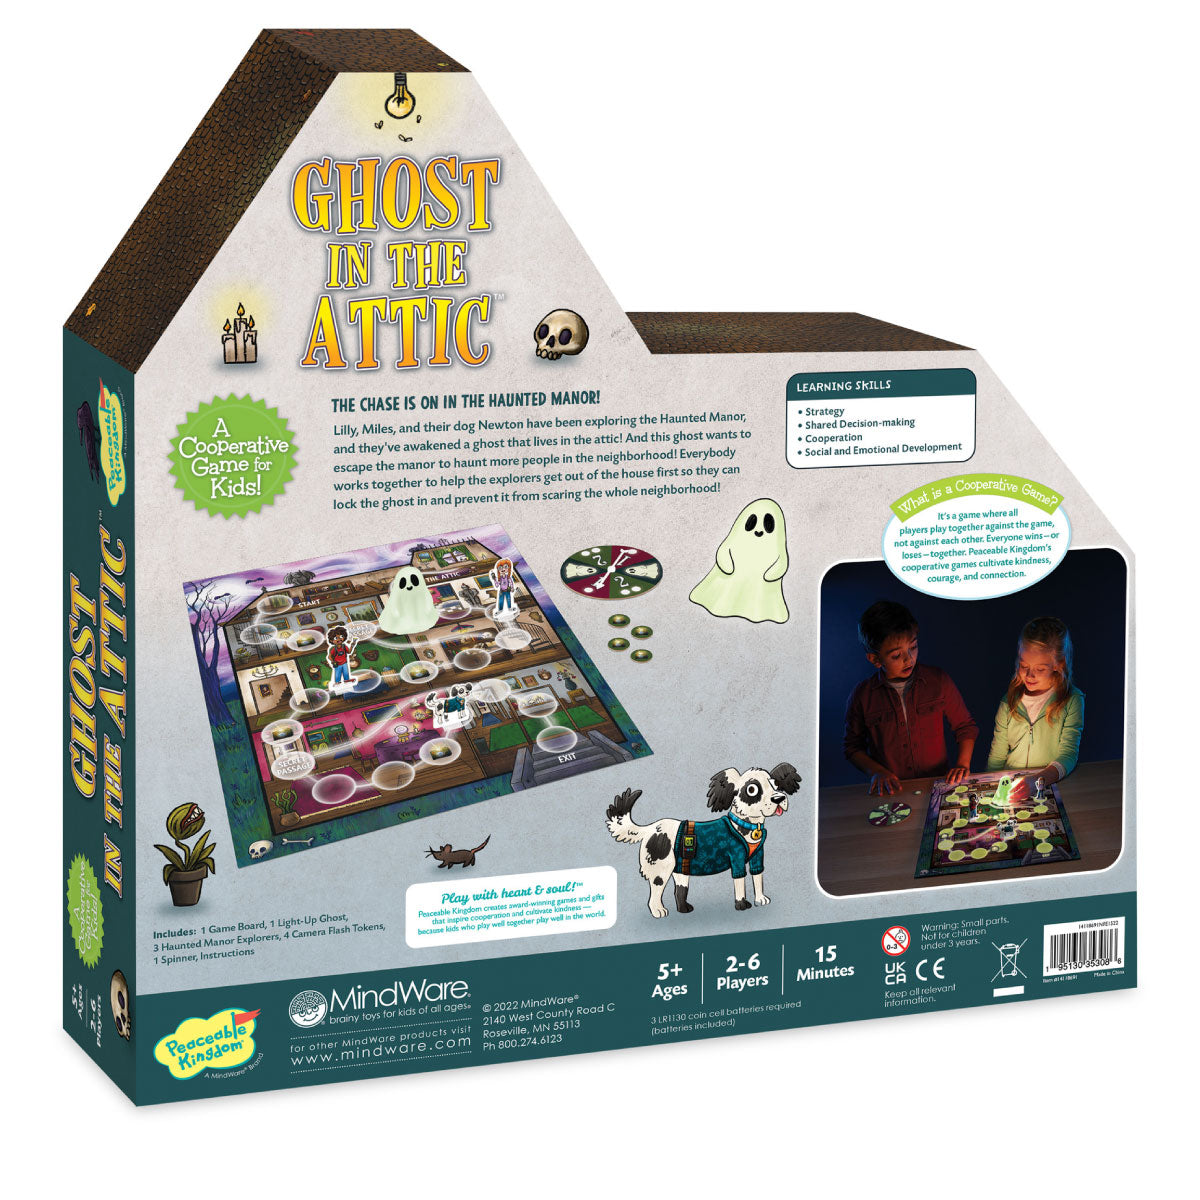 Peaceable Kingdom Ghost in the Attic Cooperative Game